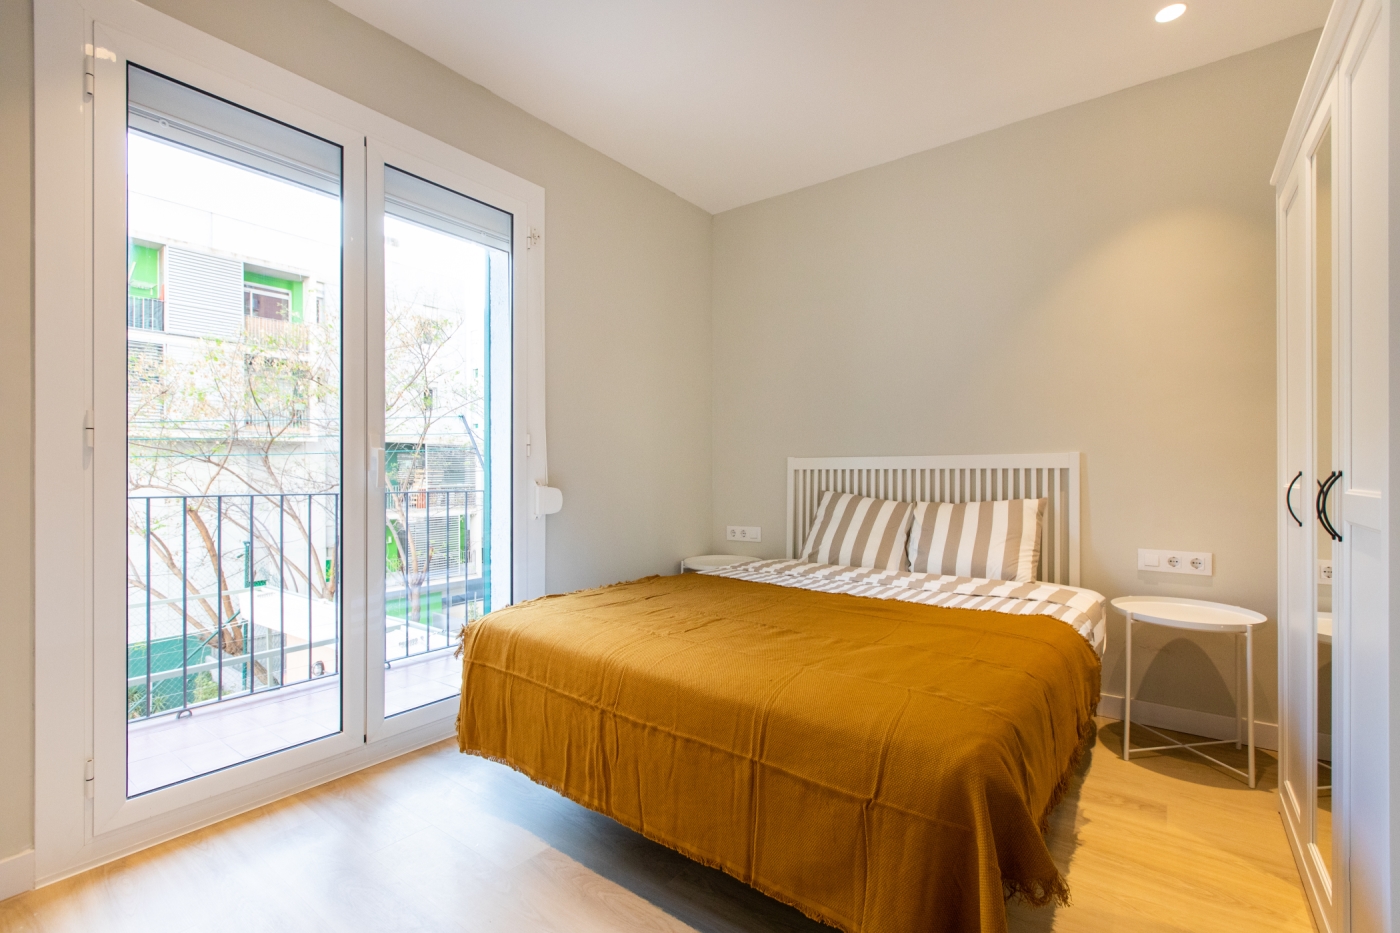 NEWLY RENOVATED APARTMENT BEHIND THE DIAGONAL ILLA in BARCELONA